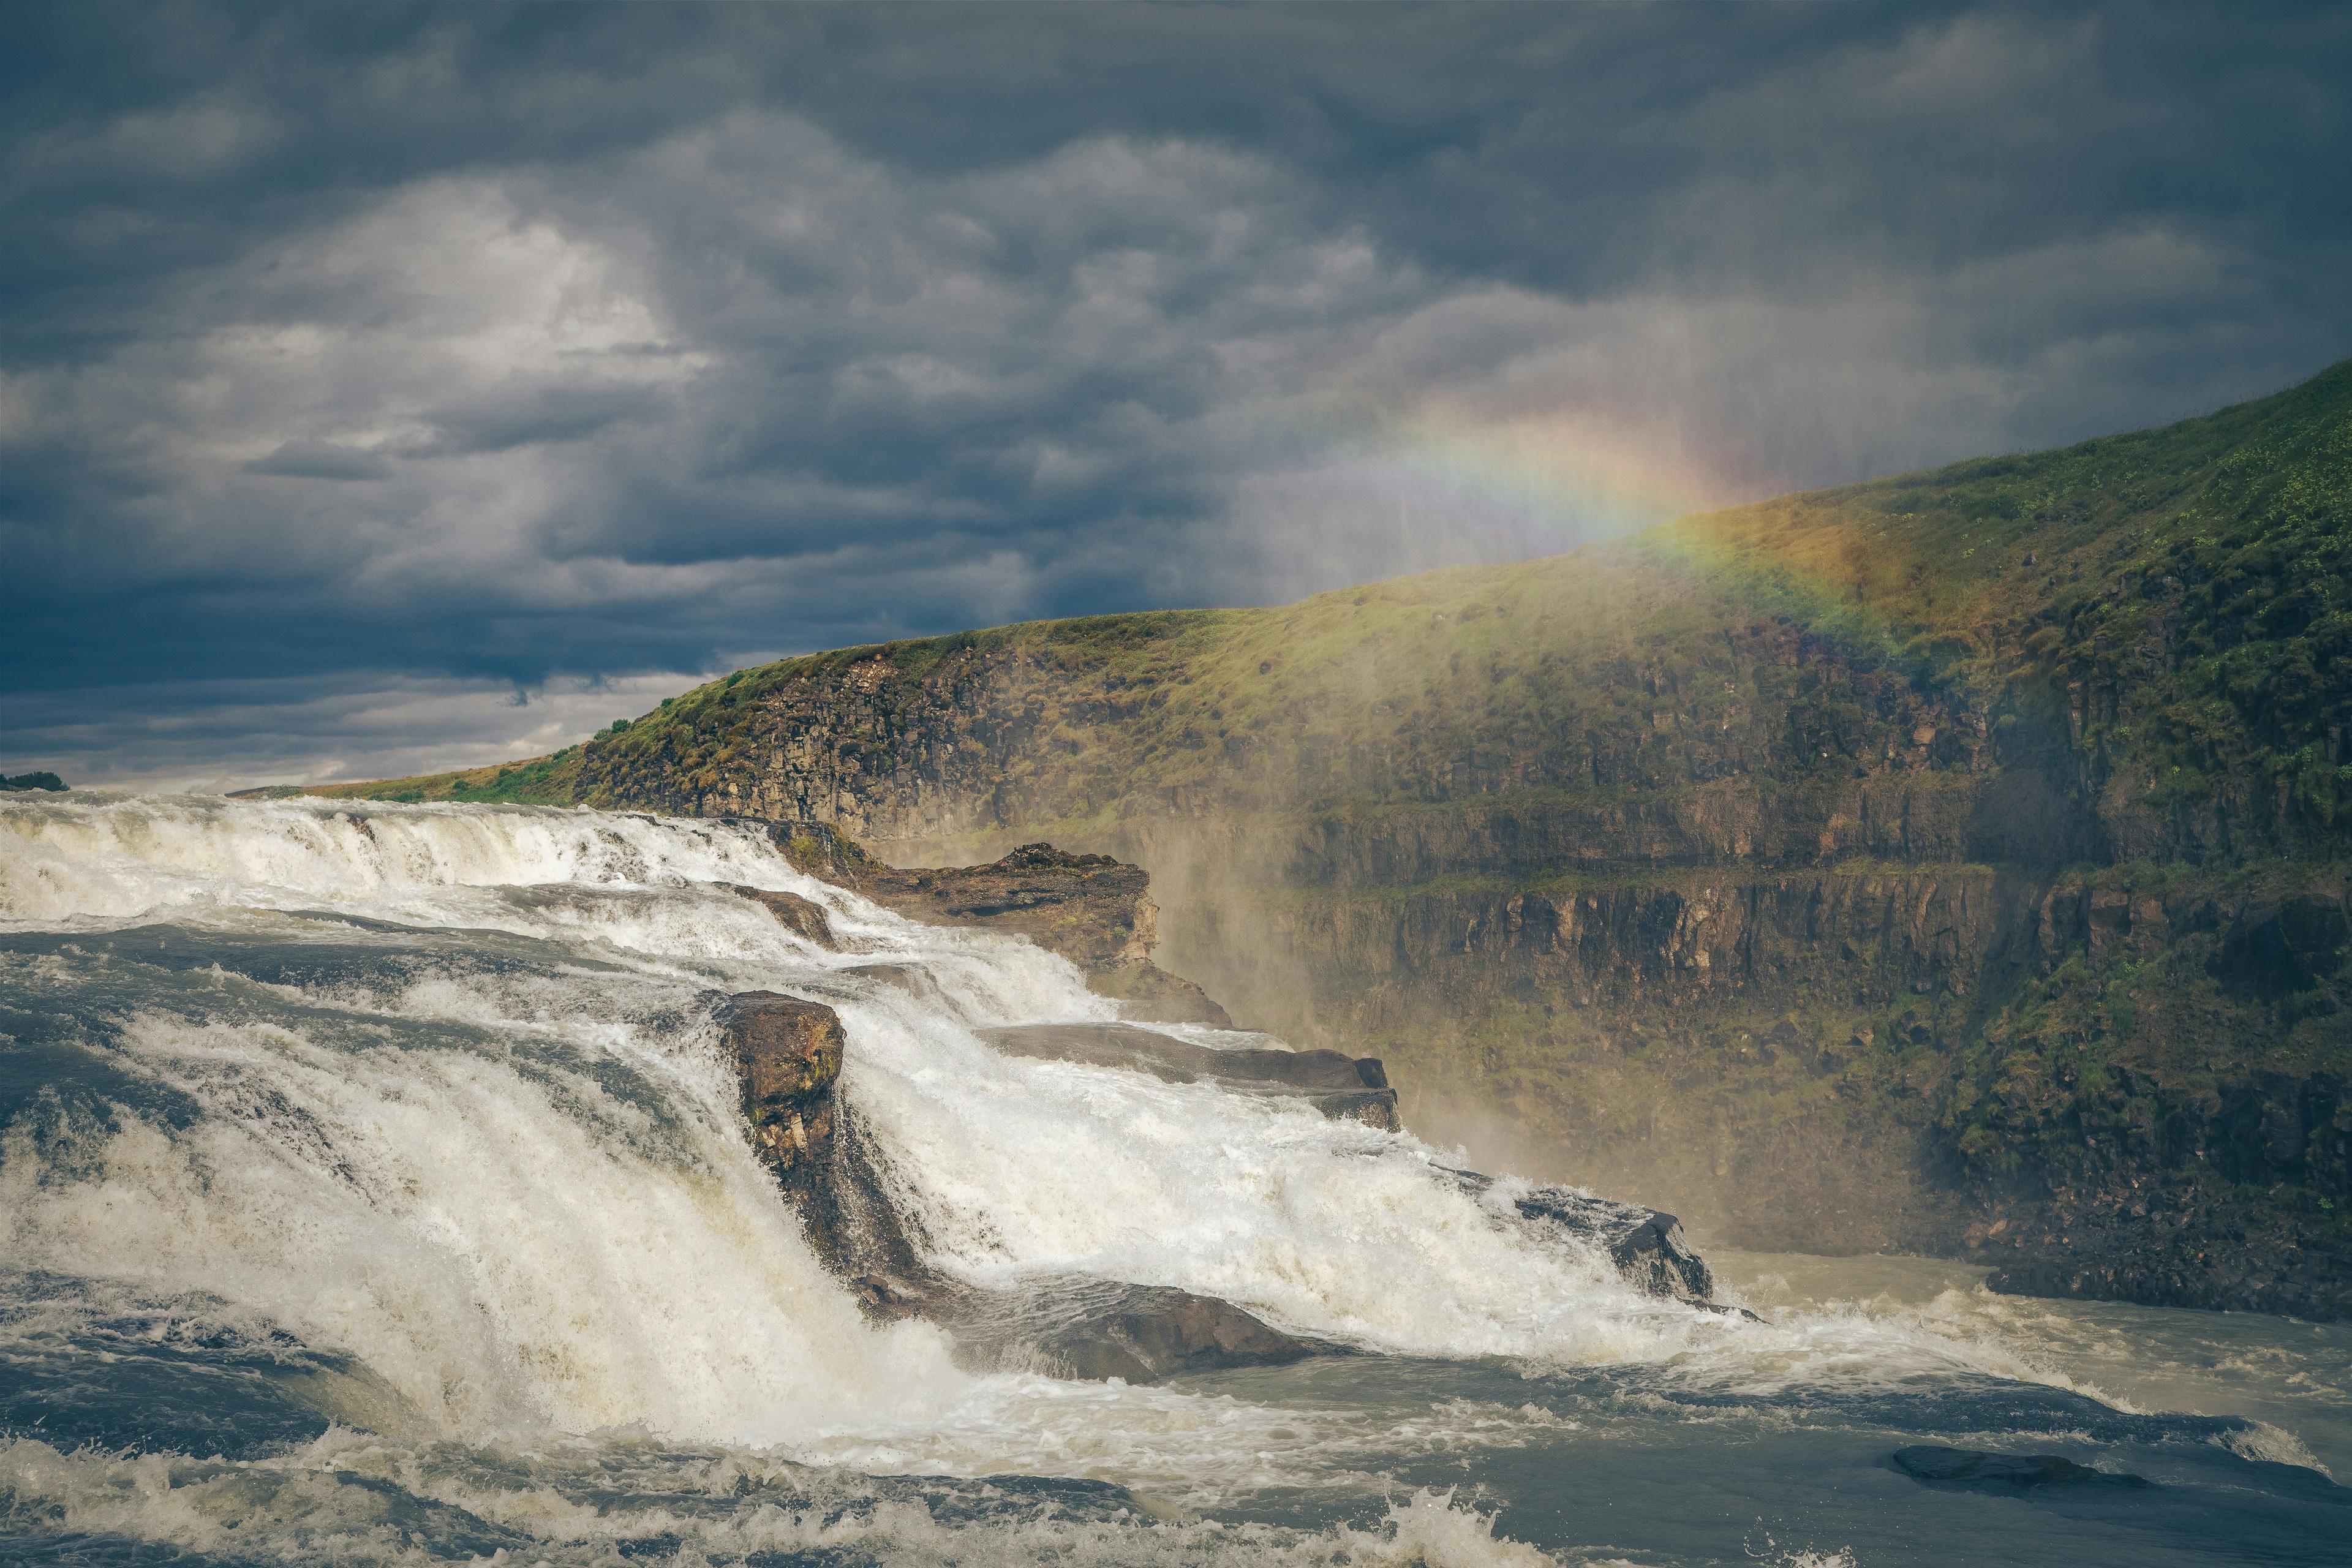 Gullfoss waterfall cascading into a river within a rugged landscape, bathed in sunlight piercing through the mist, a scene characteristic of the Golden Circle tourist route in Iceland.